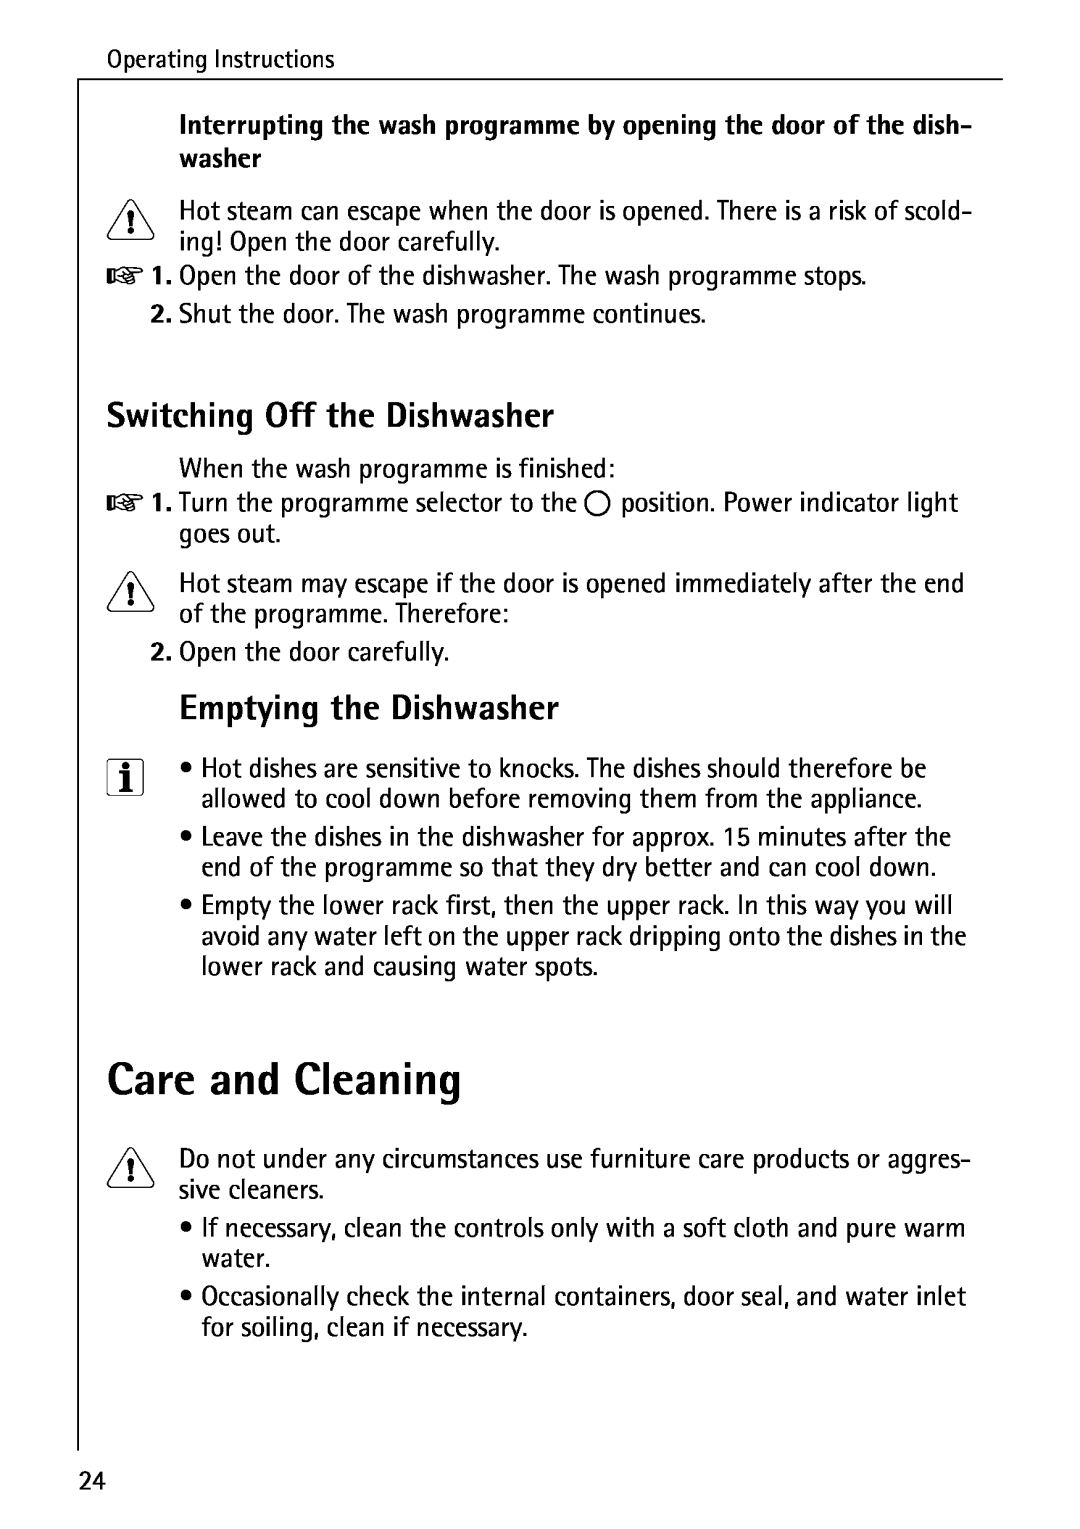 AEG 40260 I manual Care and Cleaning, Switching Off the Dishwasher, Emptying the Dishwasher 